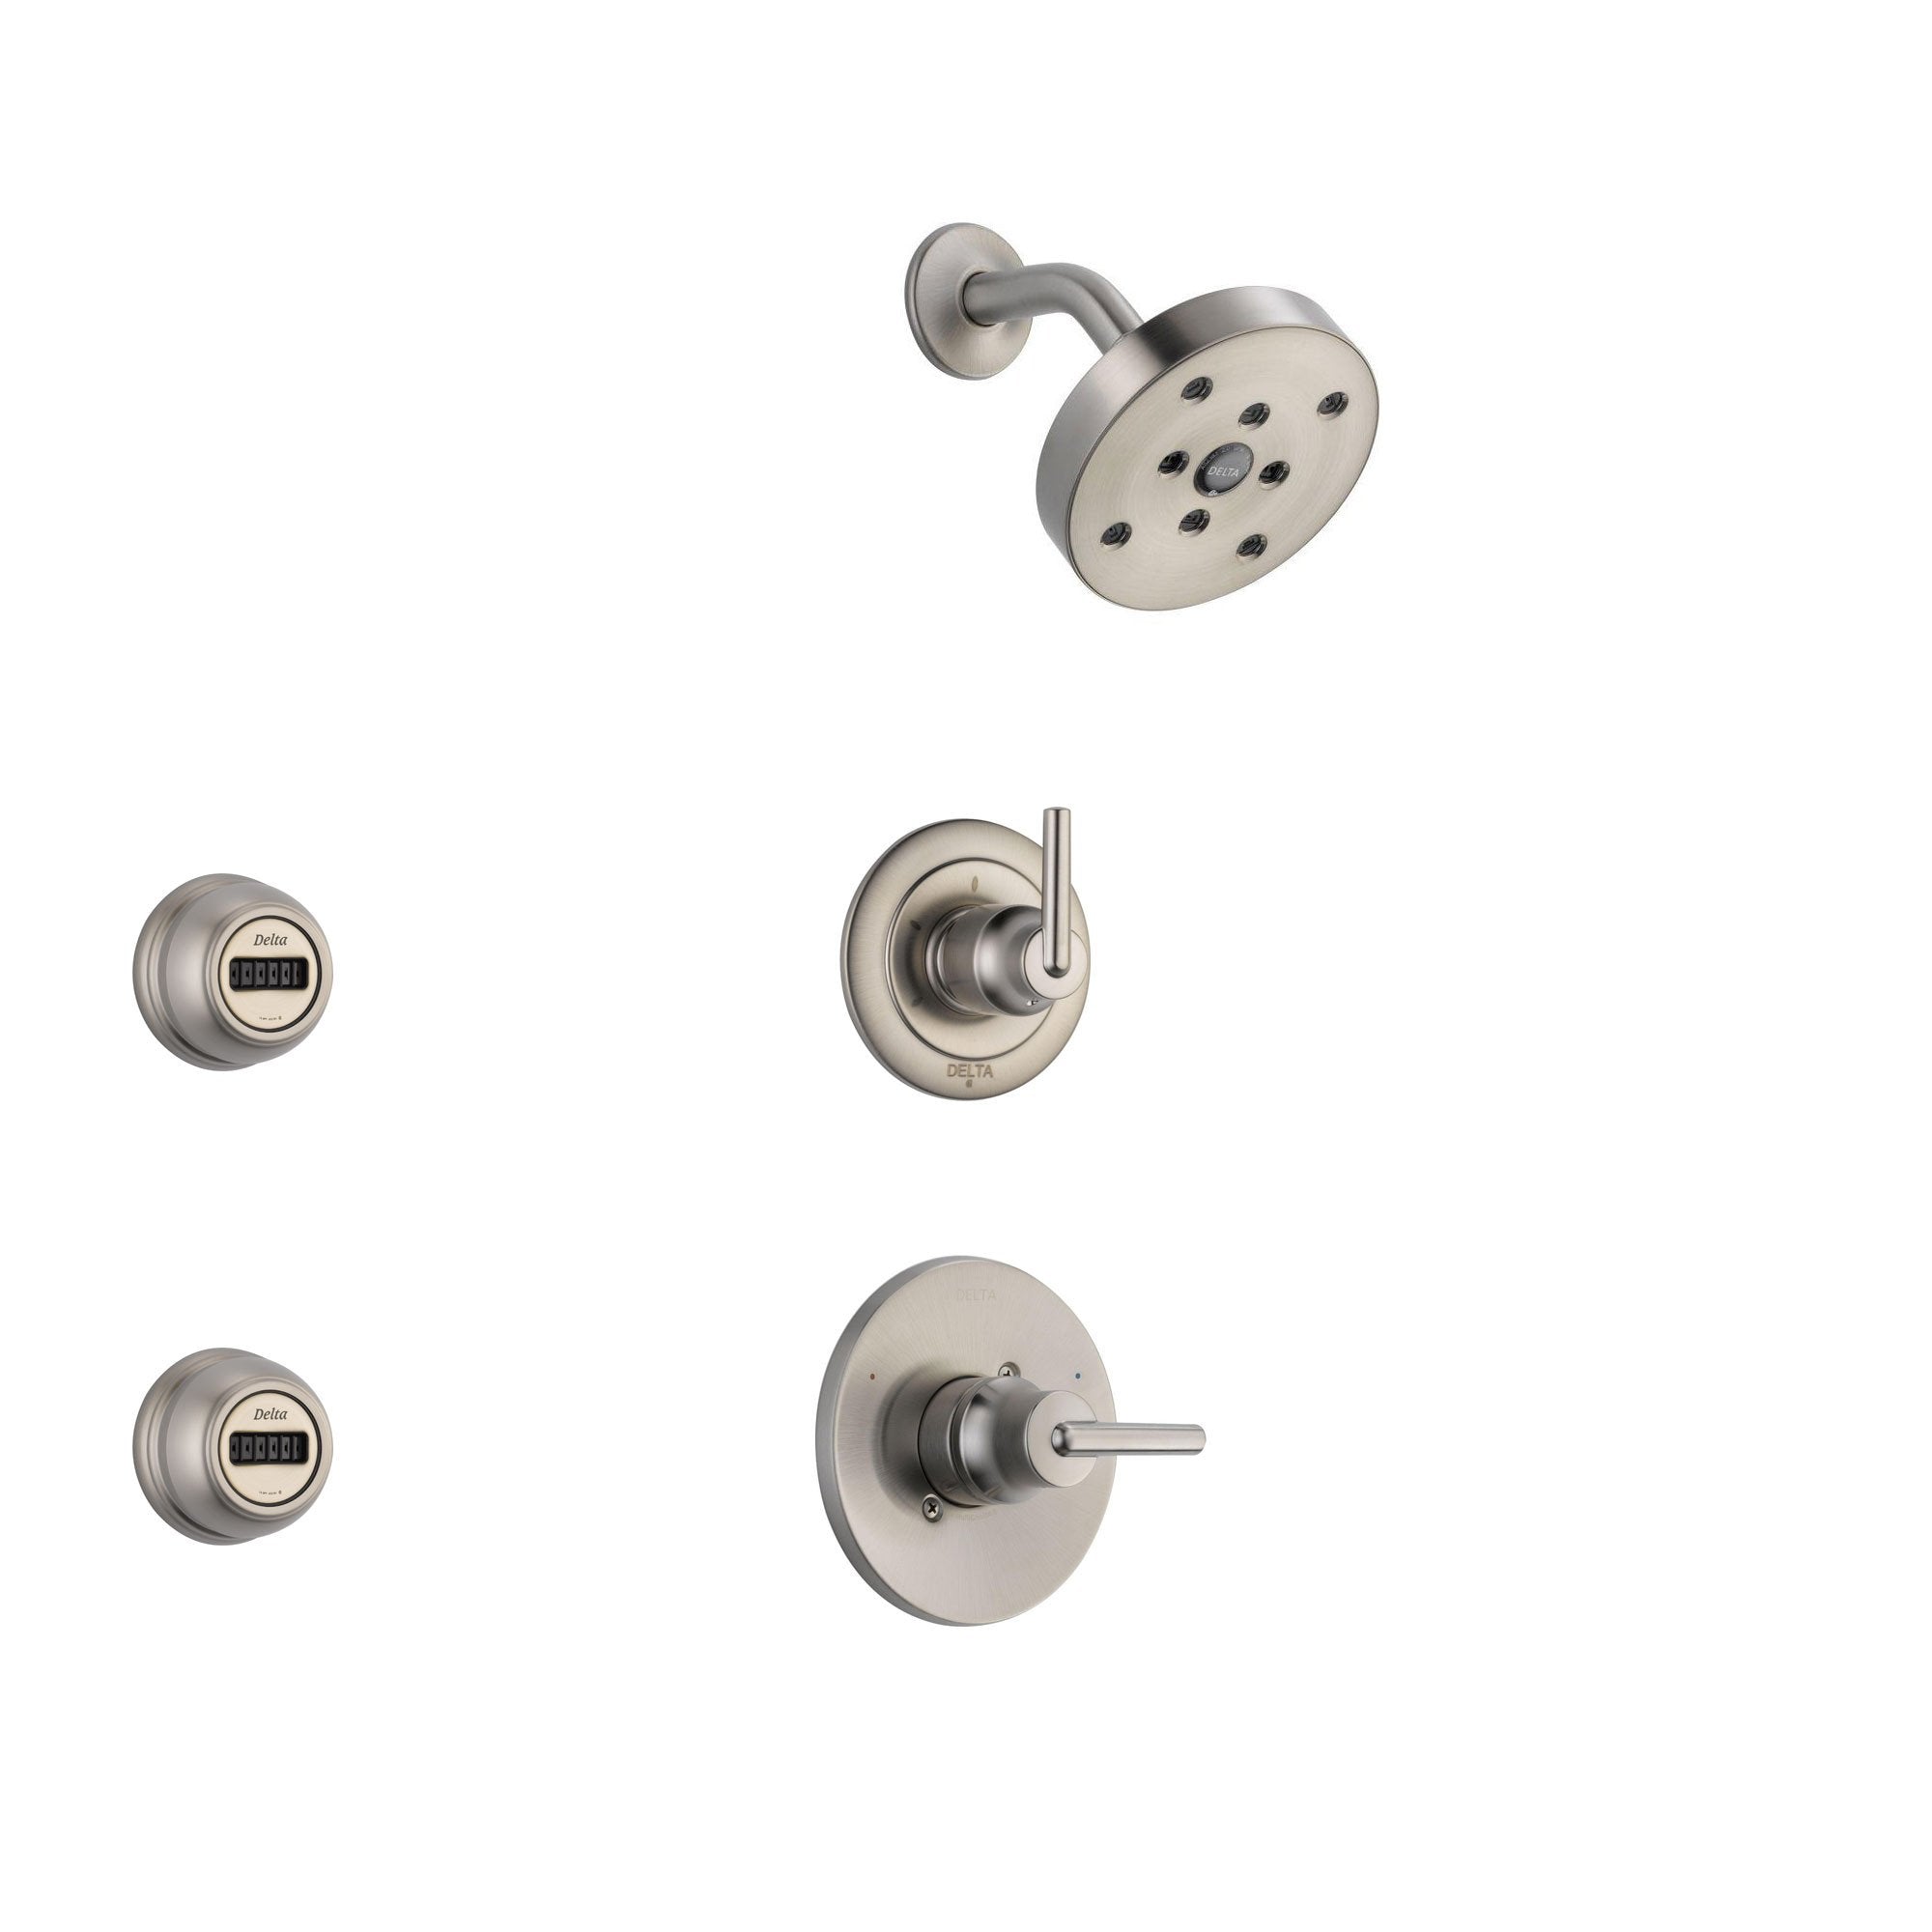 Delta Trinsic Stainless Steel Shower System with Normal Shower Handle, 3-setting Diverter, Modern Round Showerhead, and 2 Body Sprays SS145983SS